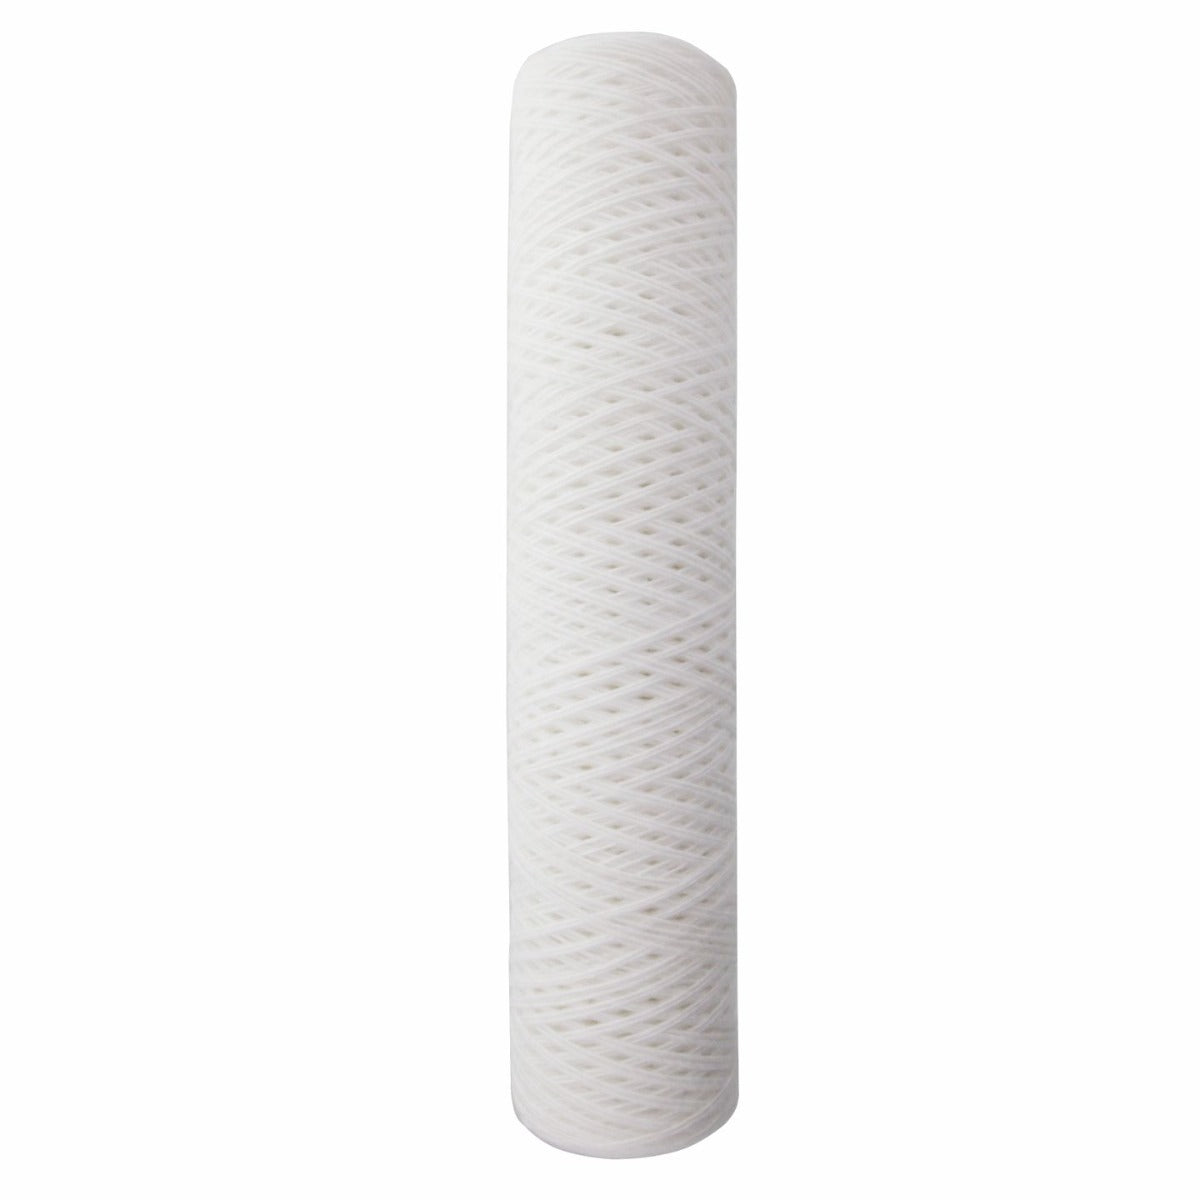 25 Micron String Wound Sediment Filter by USWF 20"x4.5"